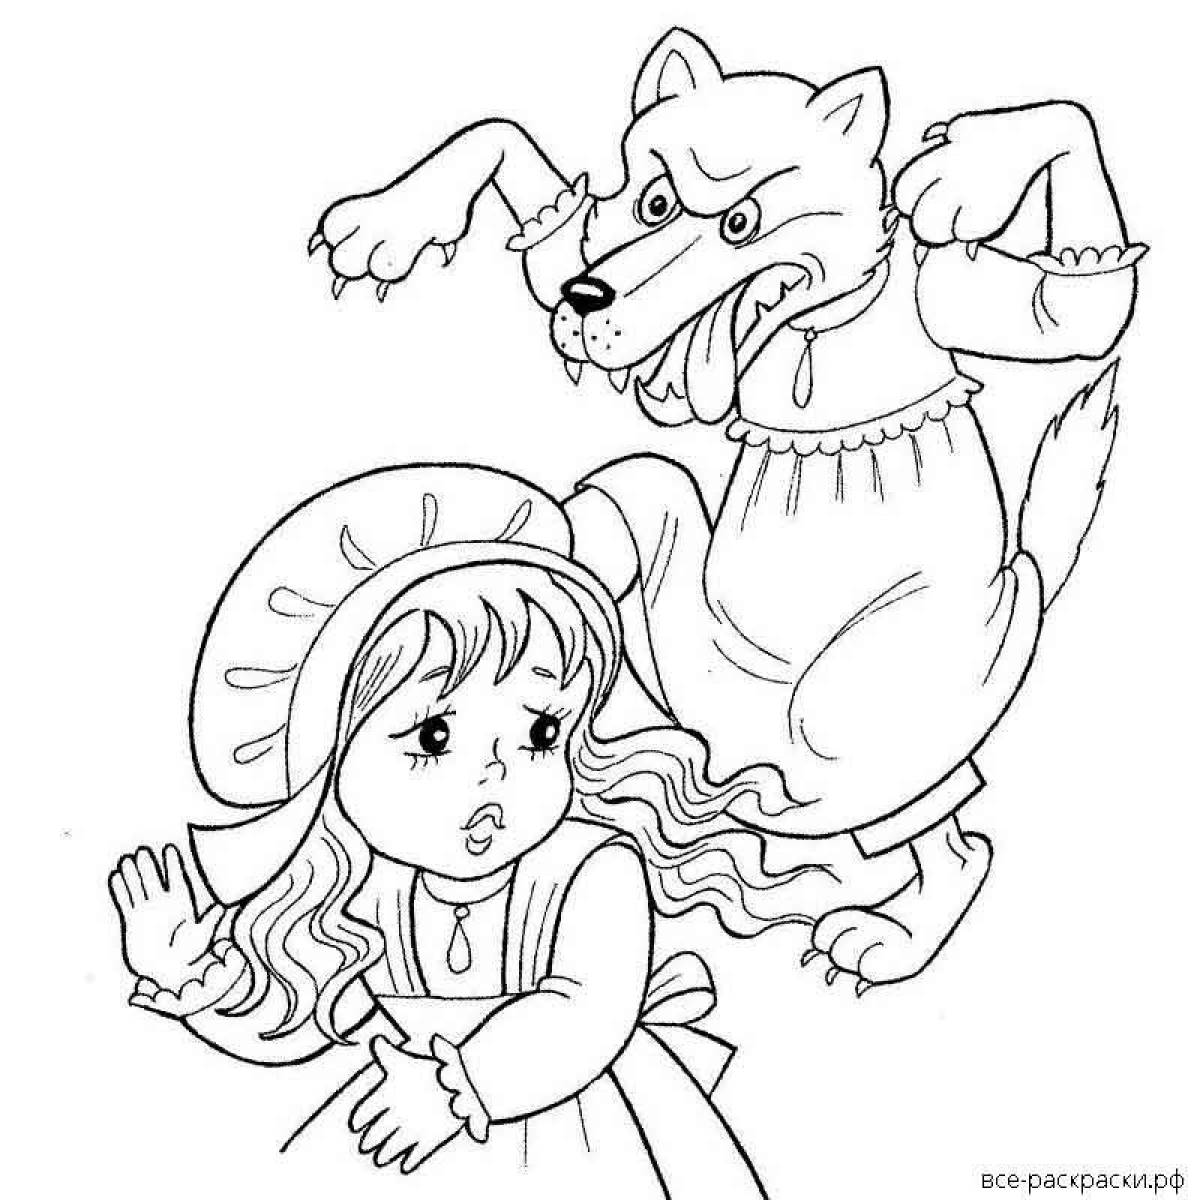 Charming little red riding hood coloring book